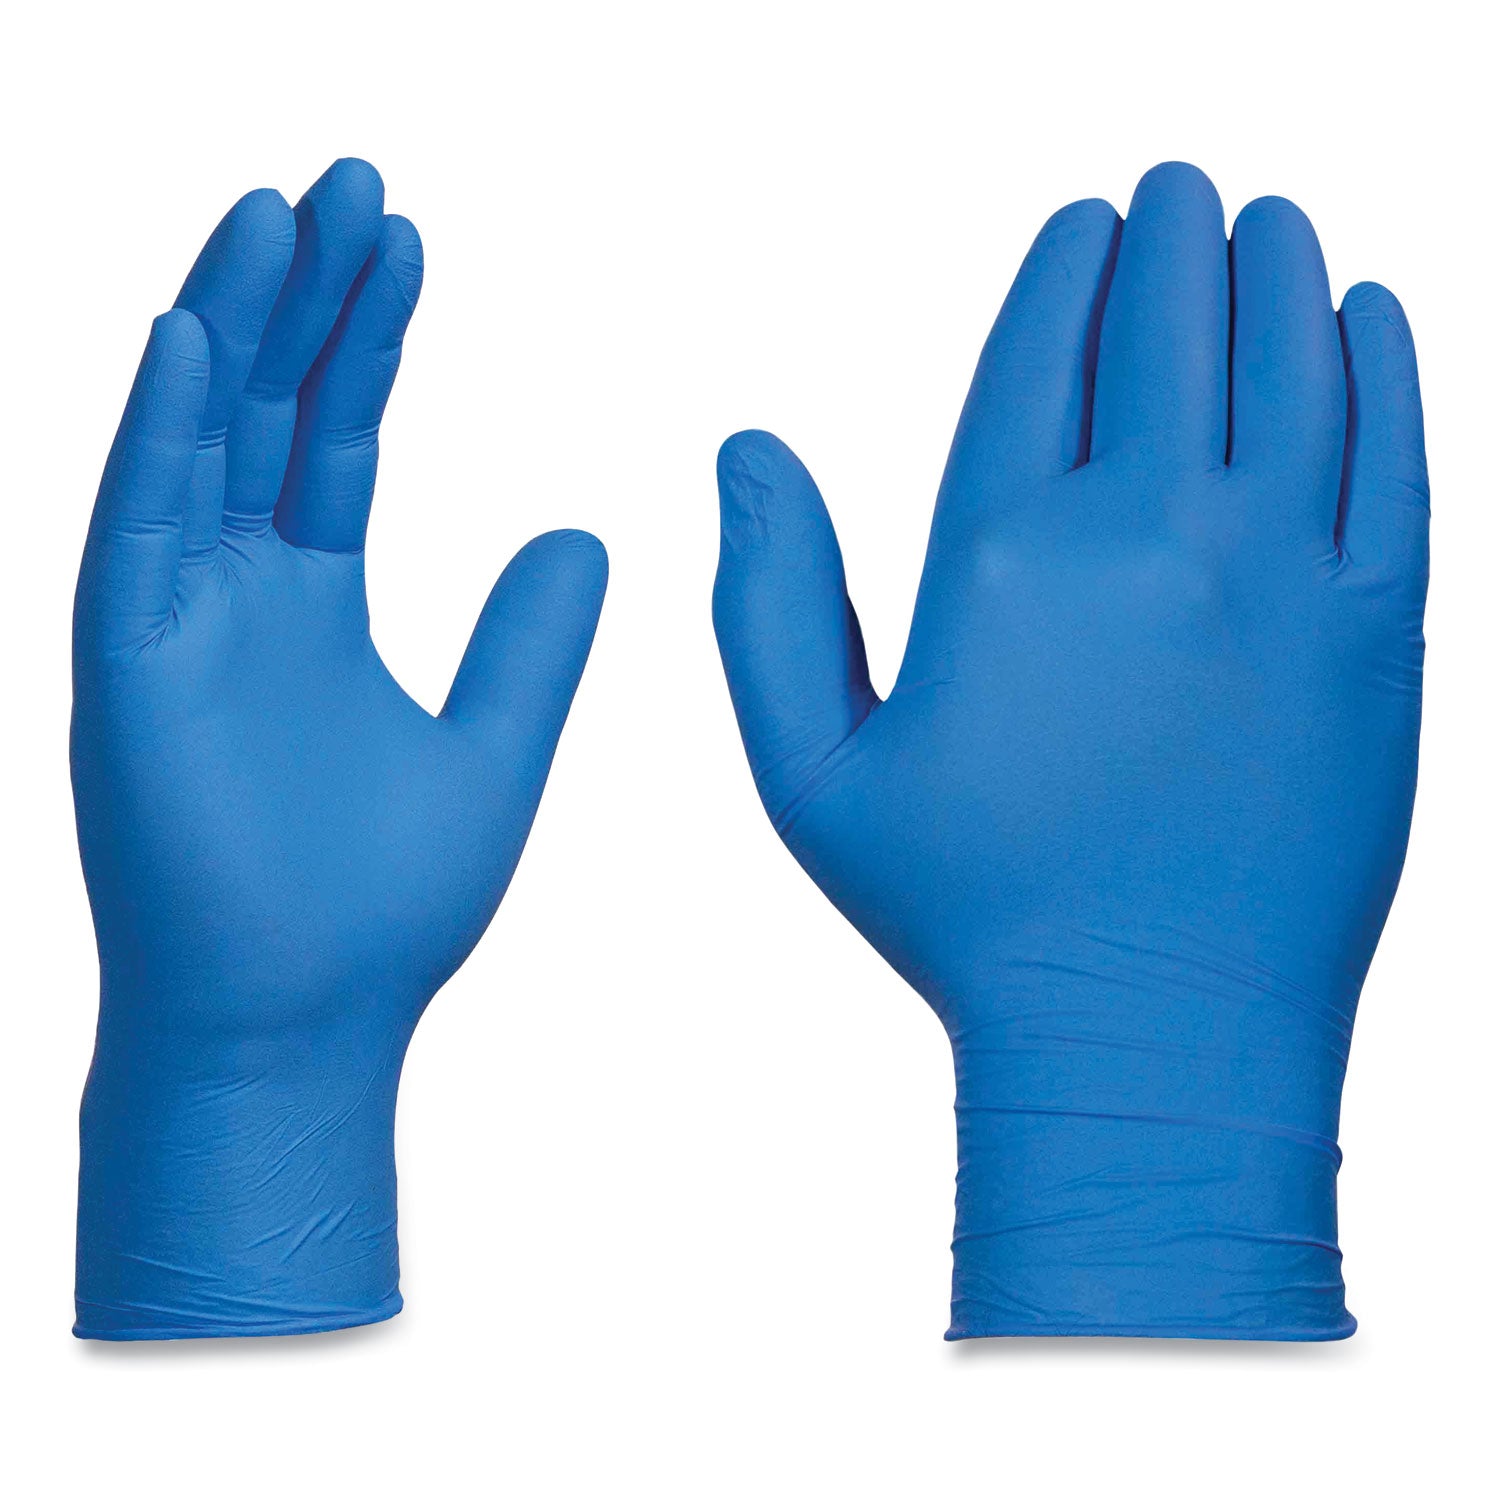 industrial-nitrile-gloves-powder-free-3-mil-x-large-blue-100-box-10-boxes-carton_axcx348100 - 6